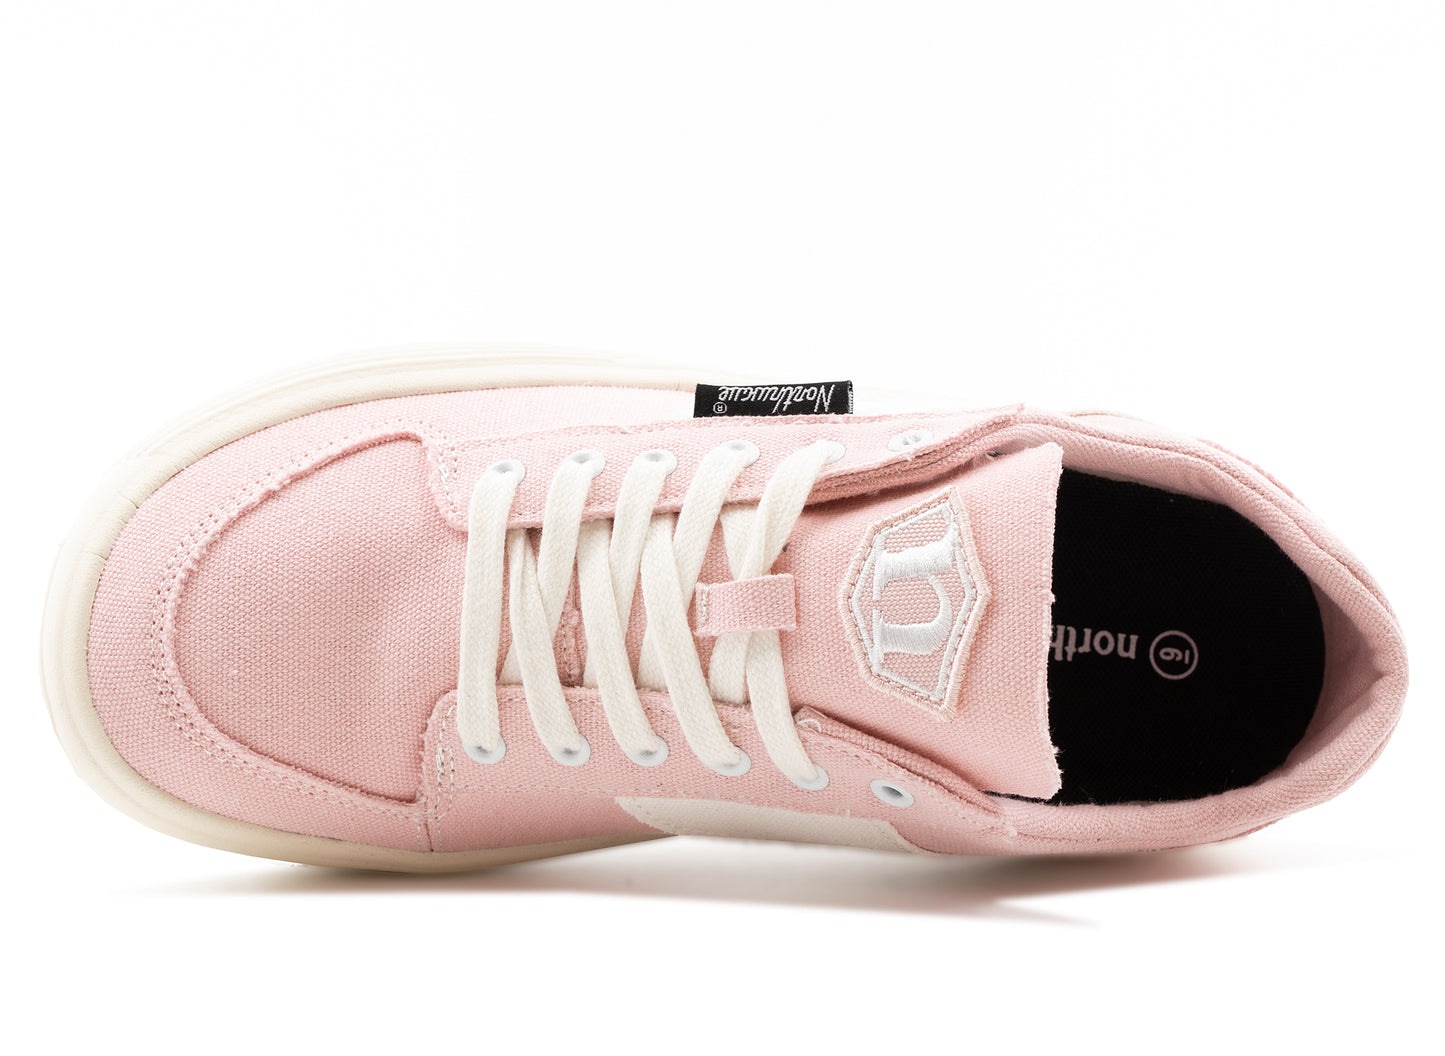 Northwave Expresso Canvas Low Sneakers in Pink